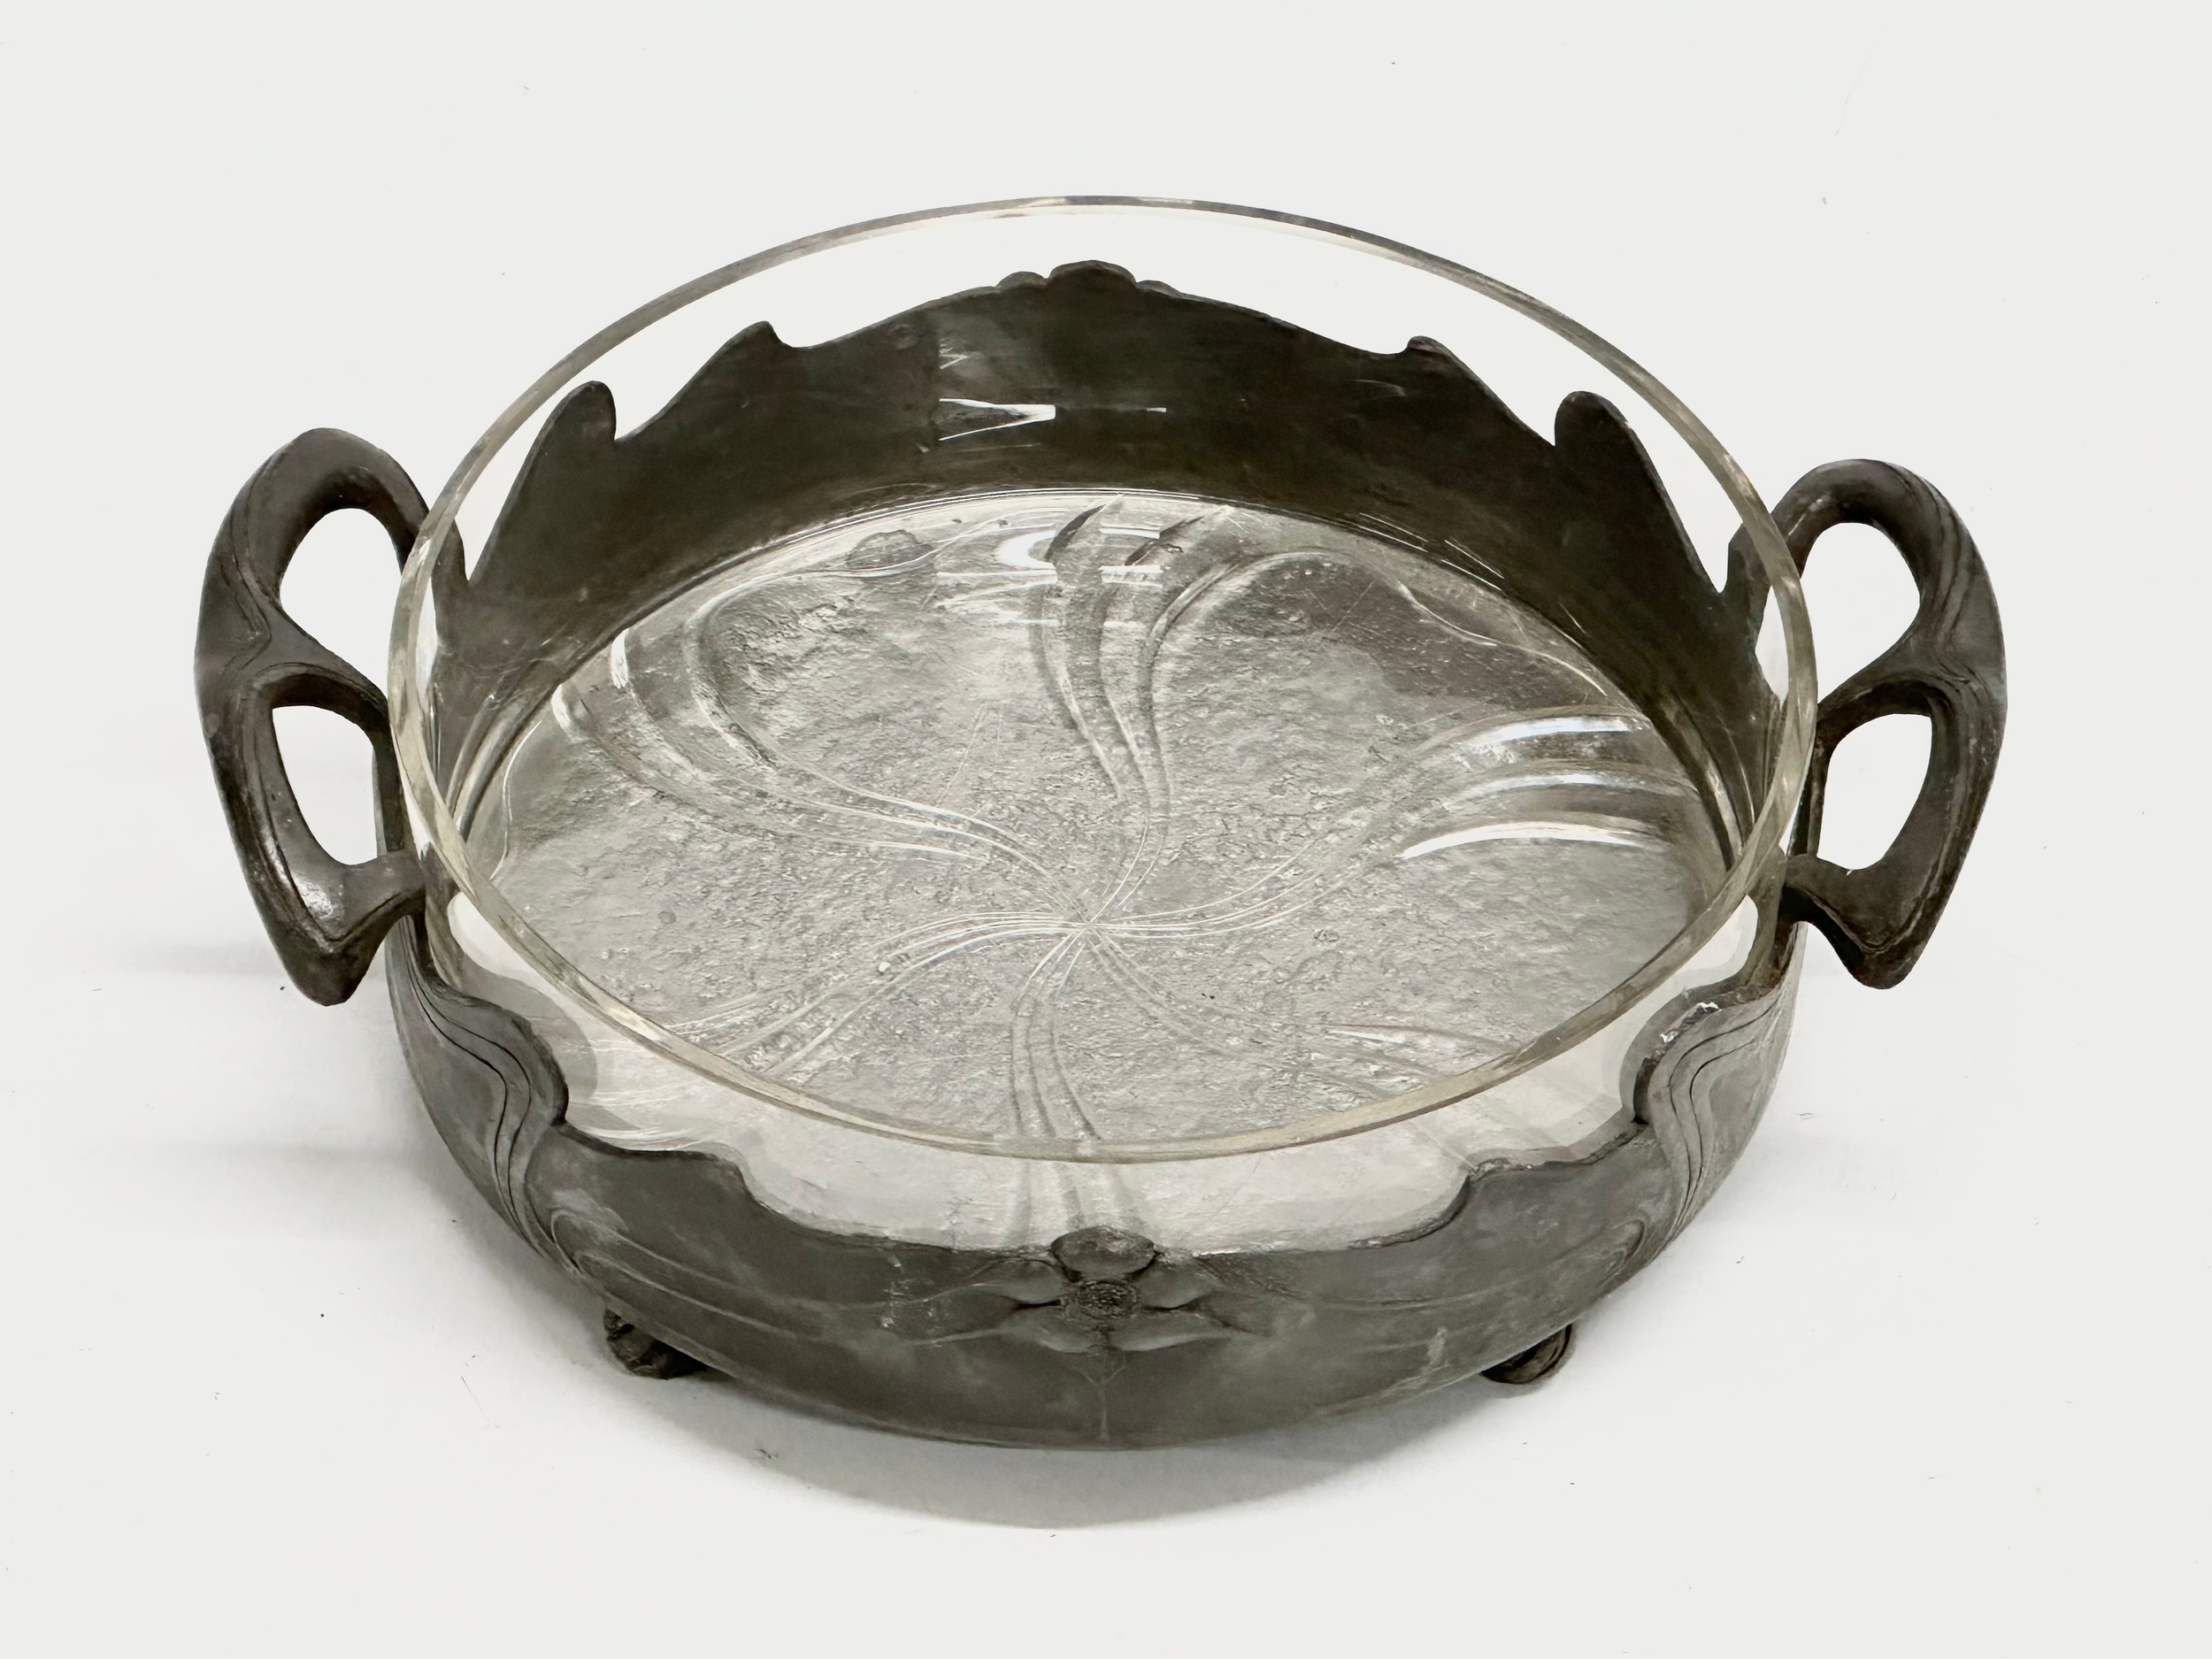 An early 20th century Art Nouveau pewter bowl with original glass liner. Orivit. Circa 1900-1910. - Image 2 of 7